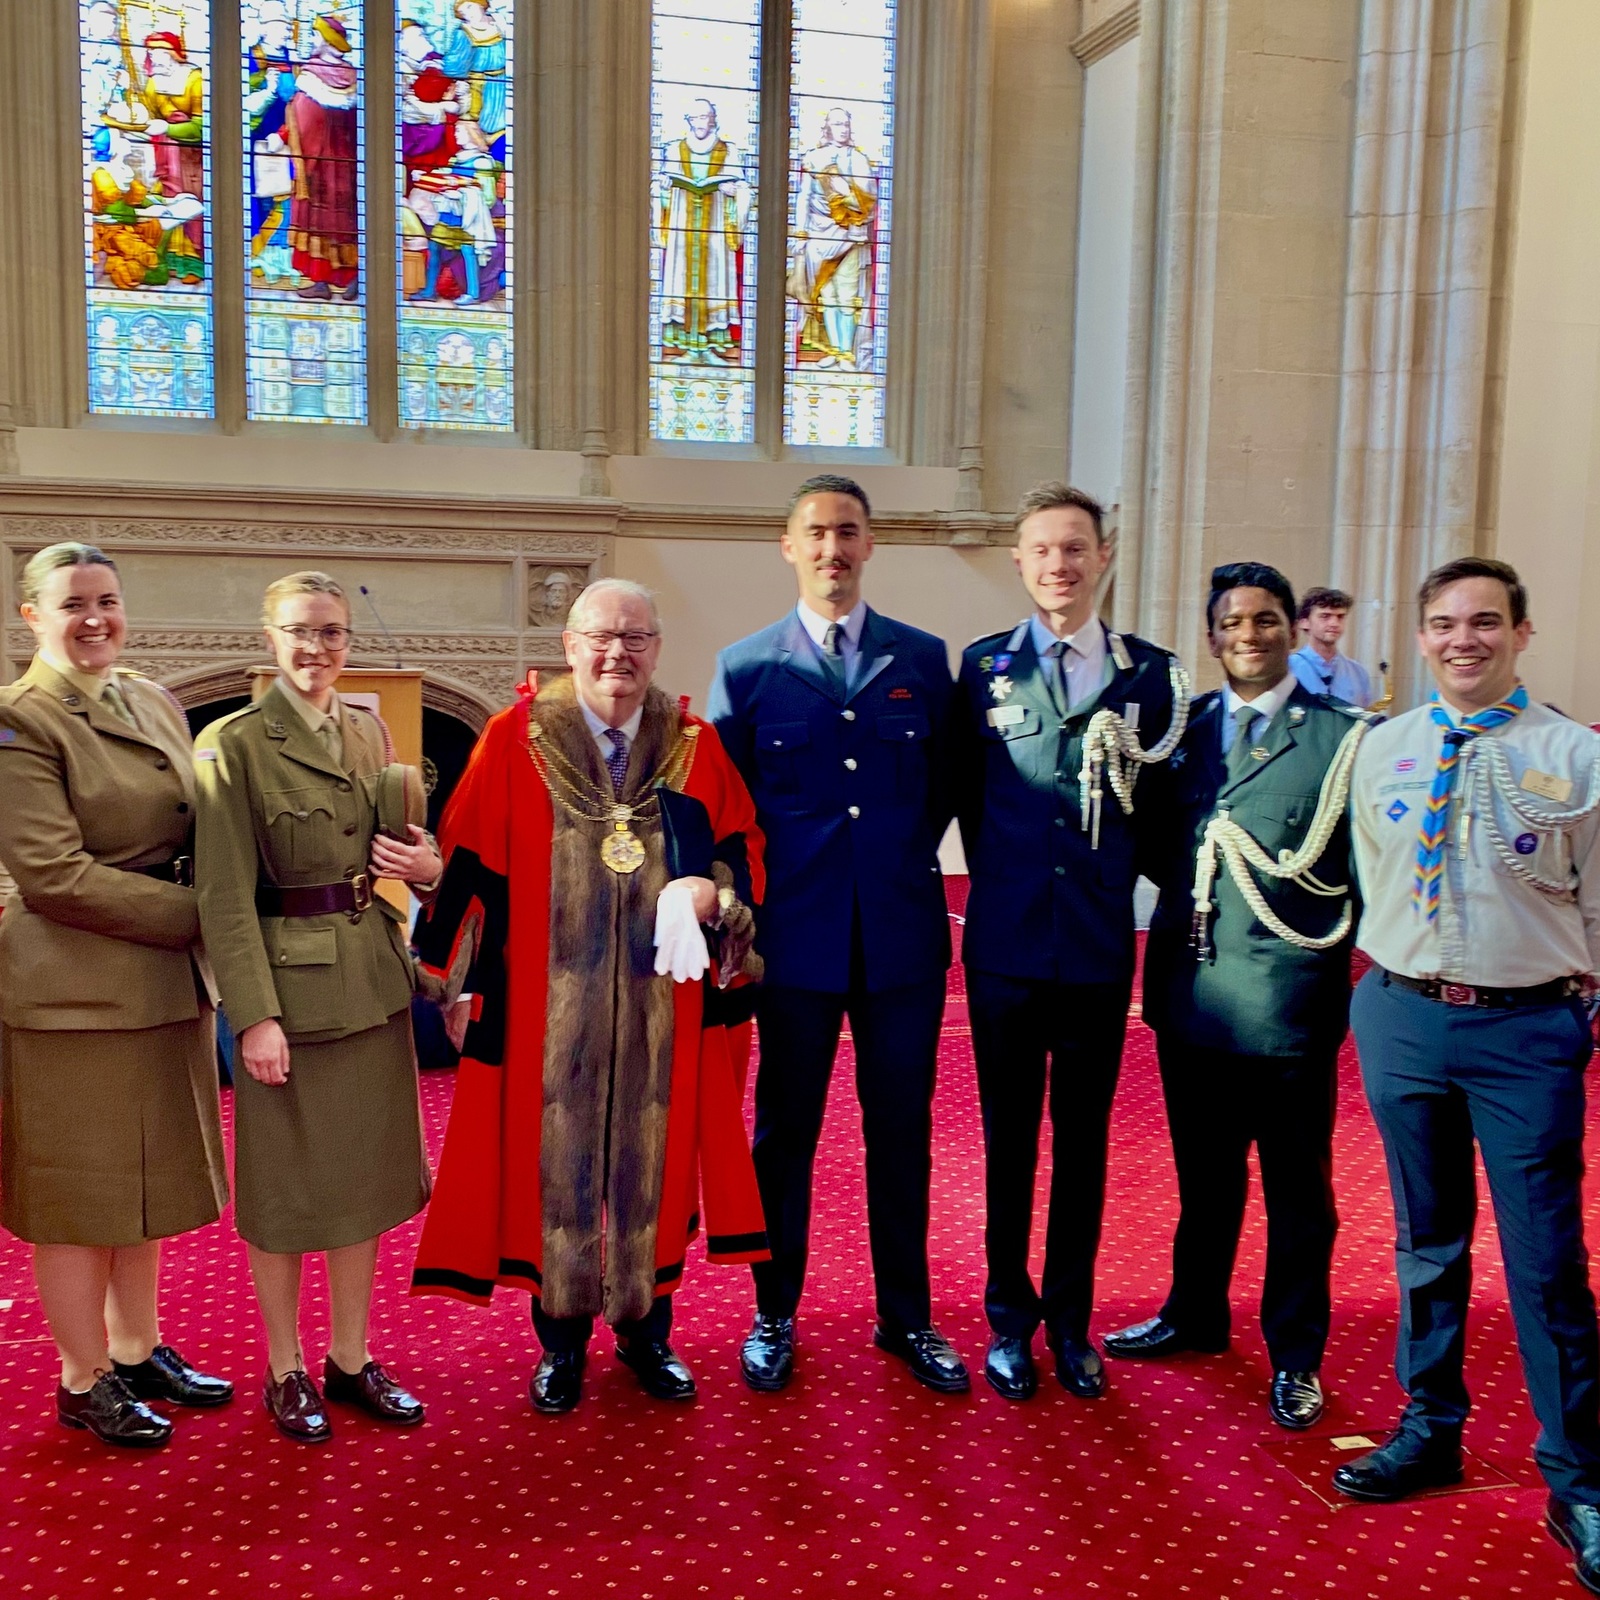 26 June 2023 - A pleasure to see Pride Week celebrated, with the raising of the Pride Flag and Reception at Guildhall, attended by so many in our thriving LGBTQ+ community.